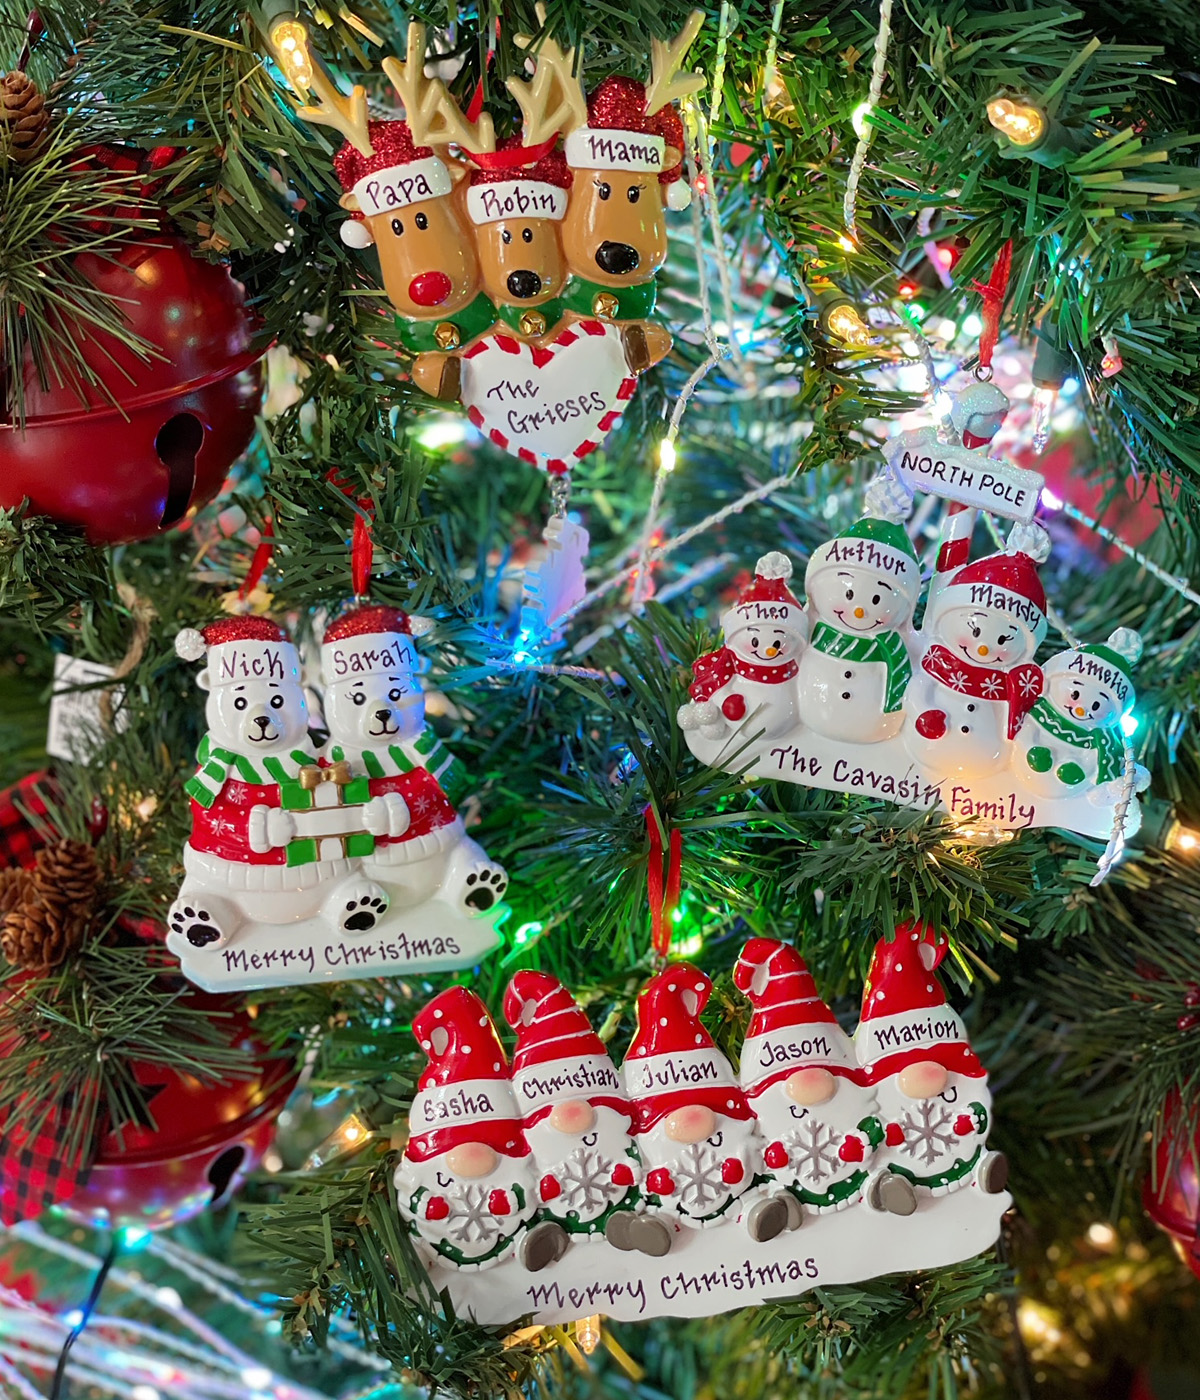 Personalized ornaments of families on a tree